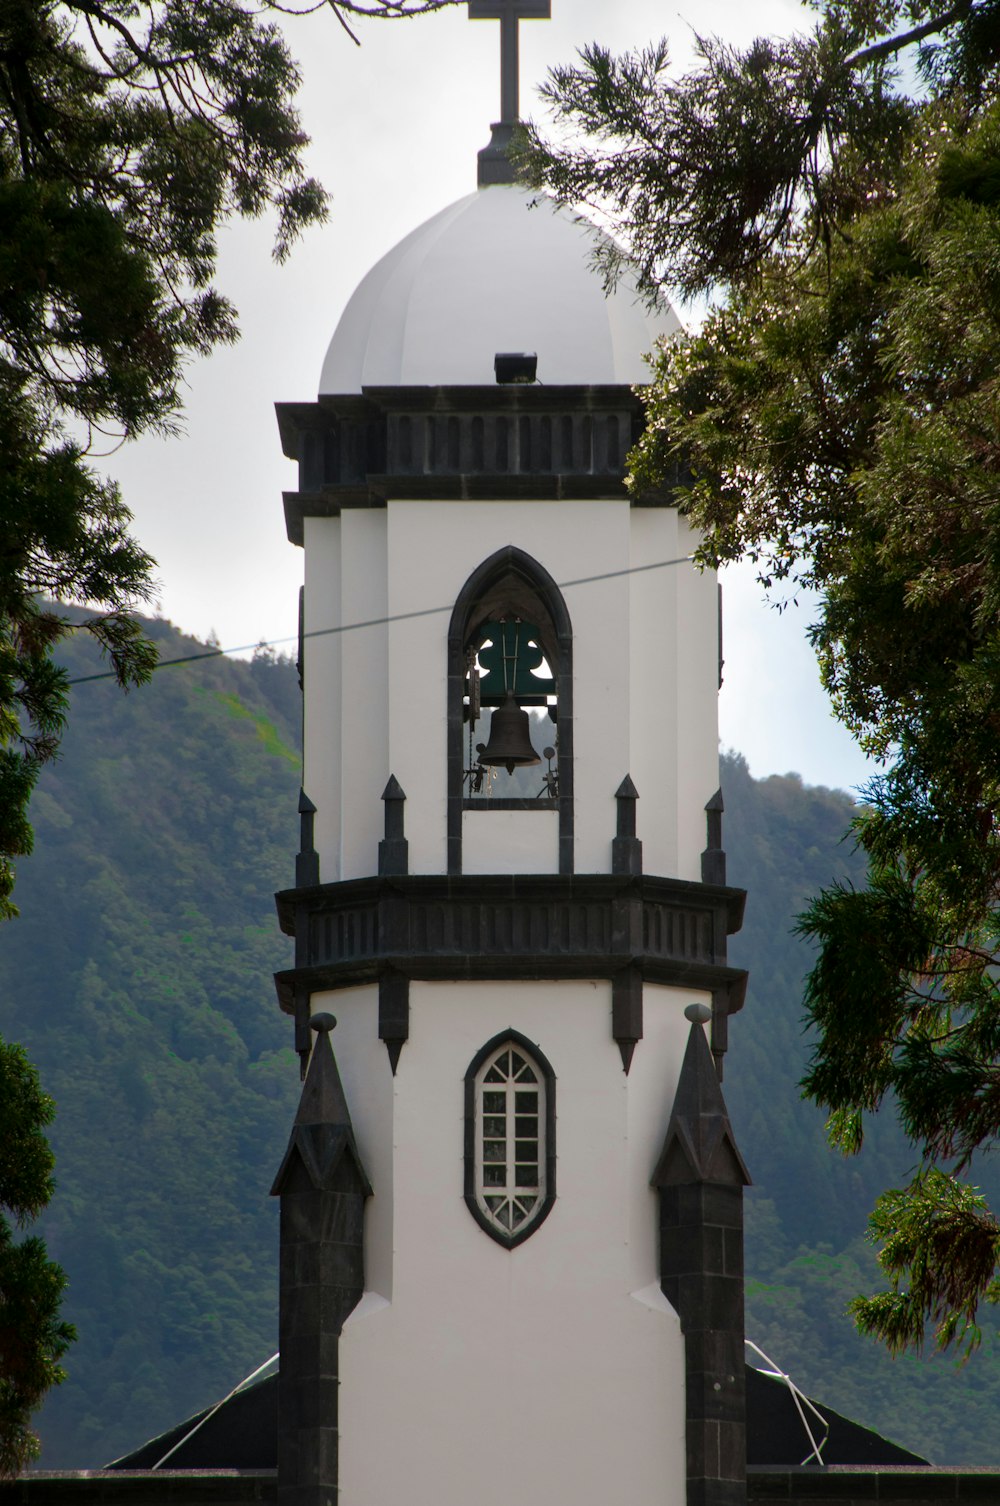 a white and black tower with a clock on it